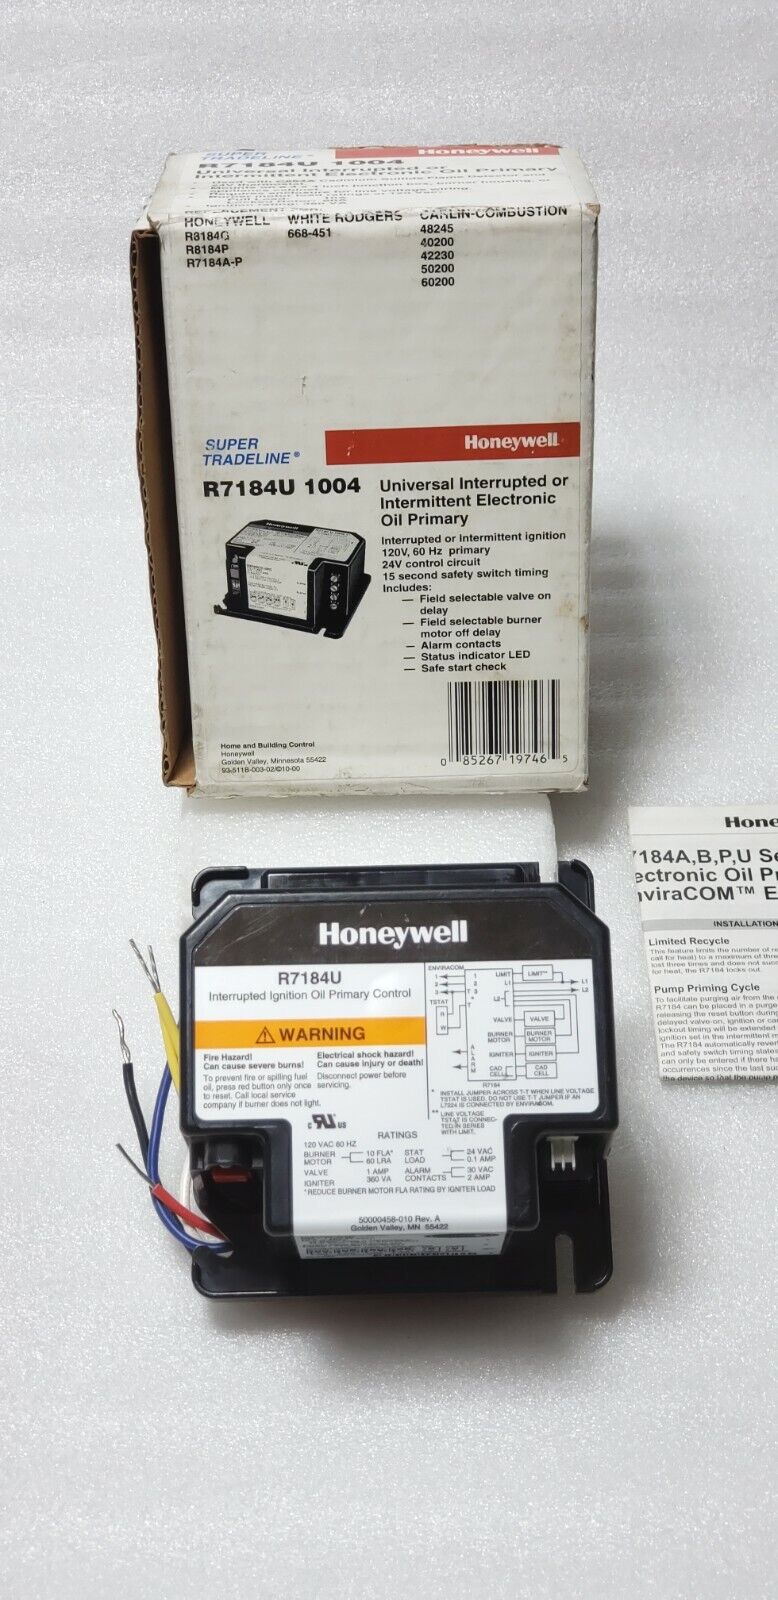 Honeywell R7184U1004 Oil Primary Control with 15 Seconds Lockout